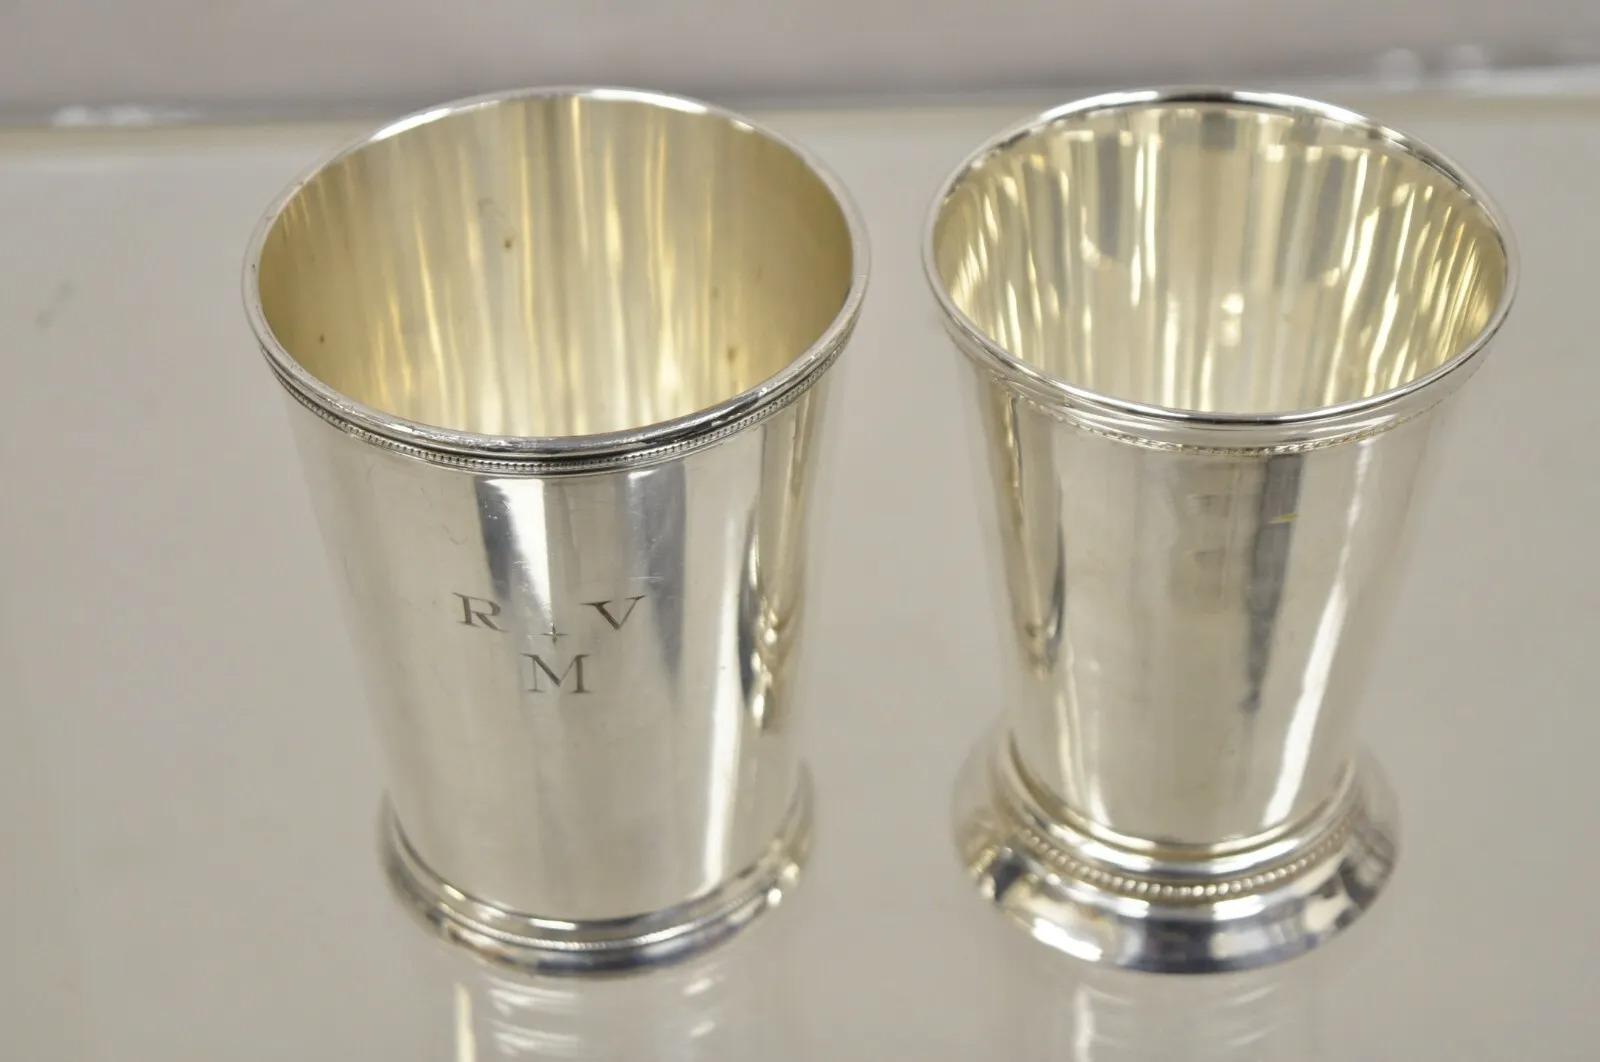 2 Vintage Silver Plated Mint Julep Cups, 1 with Monogram - 2 Pieces. Item features 2 different cups, 1 believed to be English with 